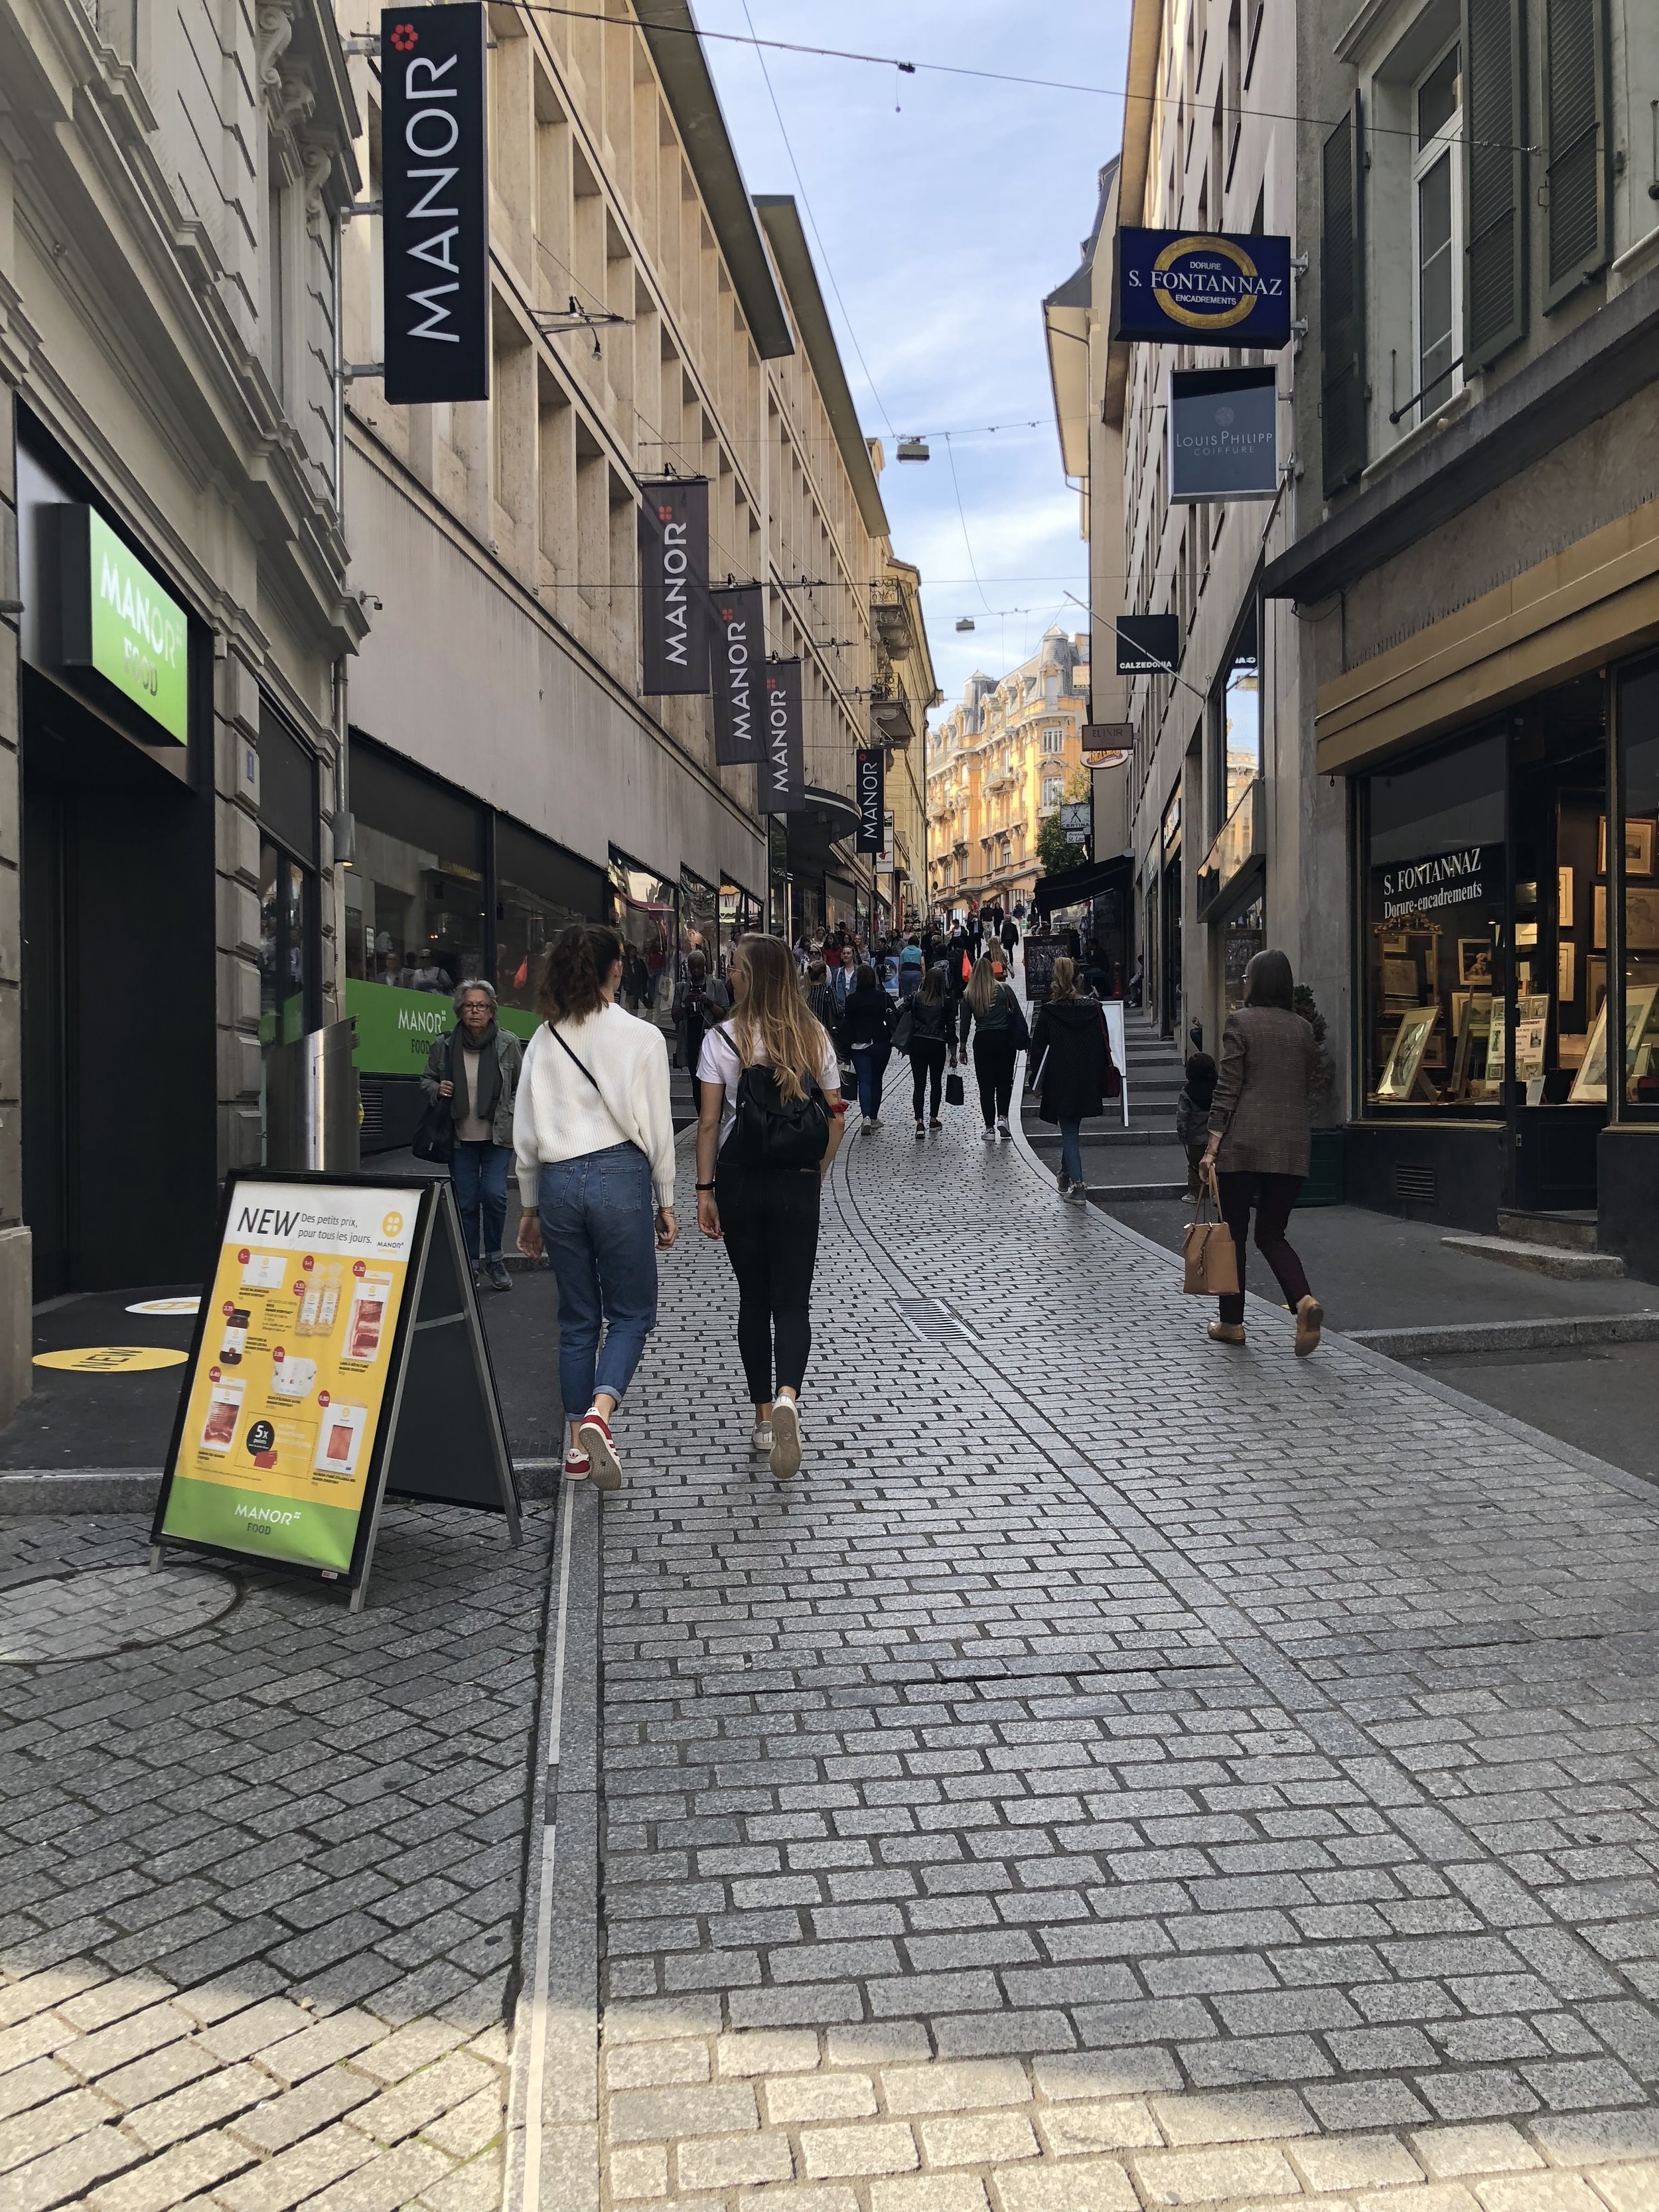  A pedestrian zone in Lausanne, showing the average slope one has to face when biking or walking around the city. Stairs on both sides facilitate travel up and down. 